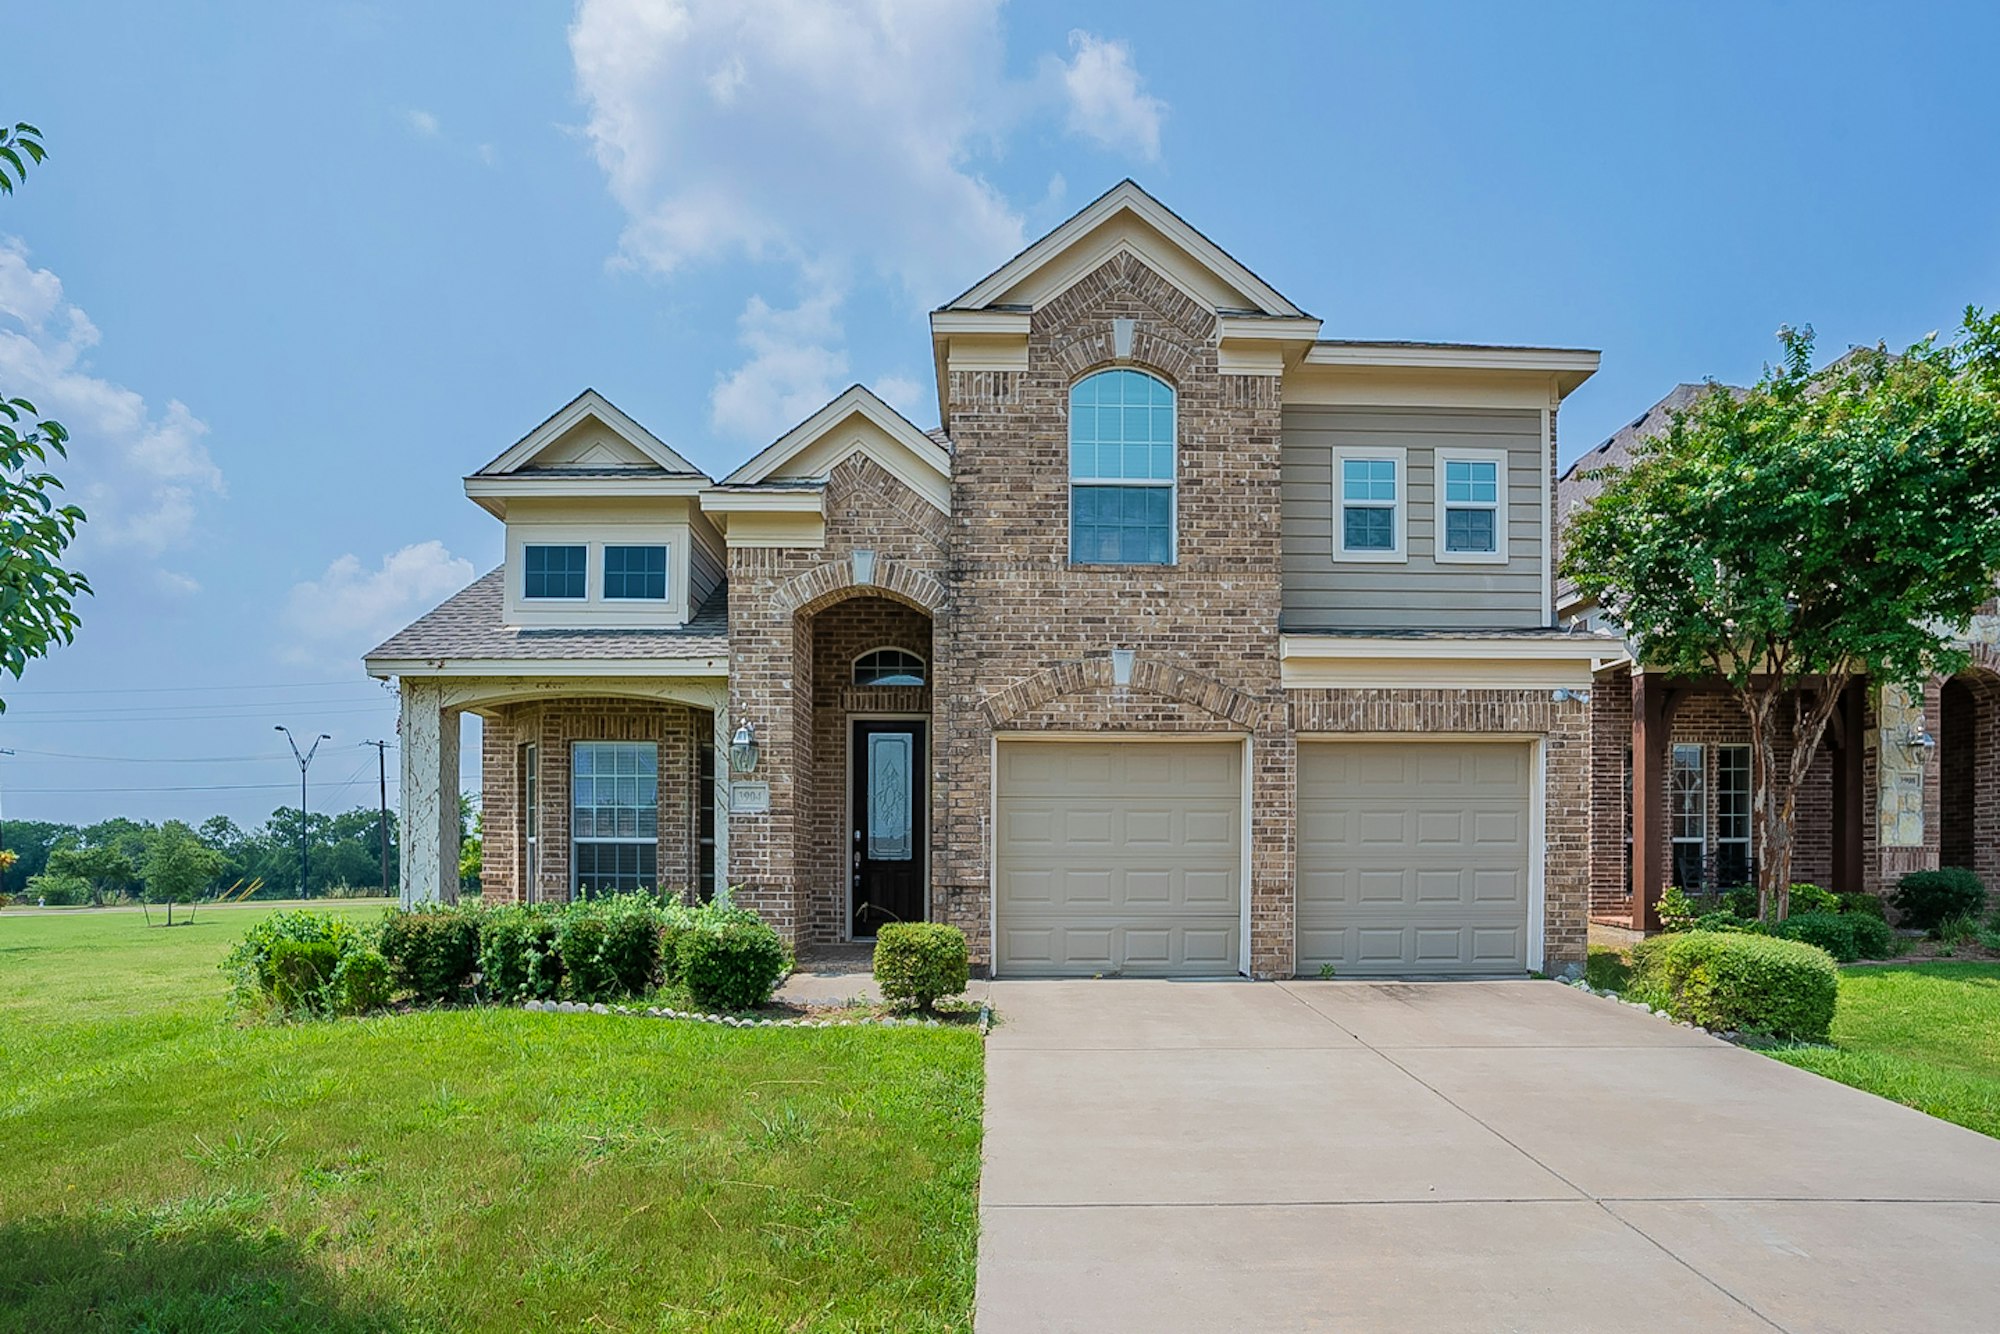 Photo 1 of 31 - 3904 Mustang Ave, Sachse, TX 75048